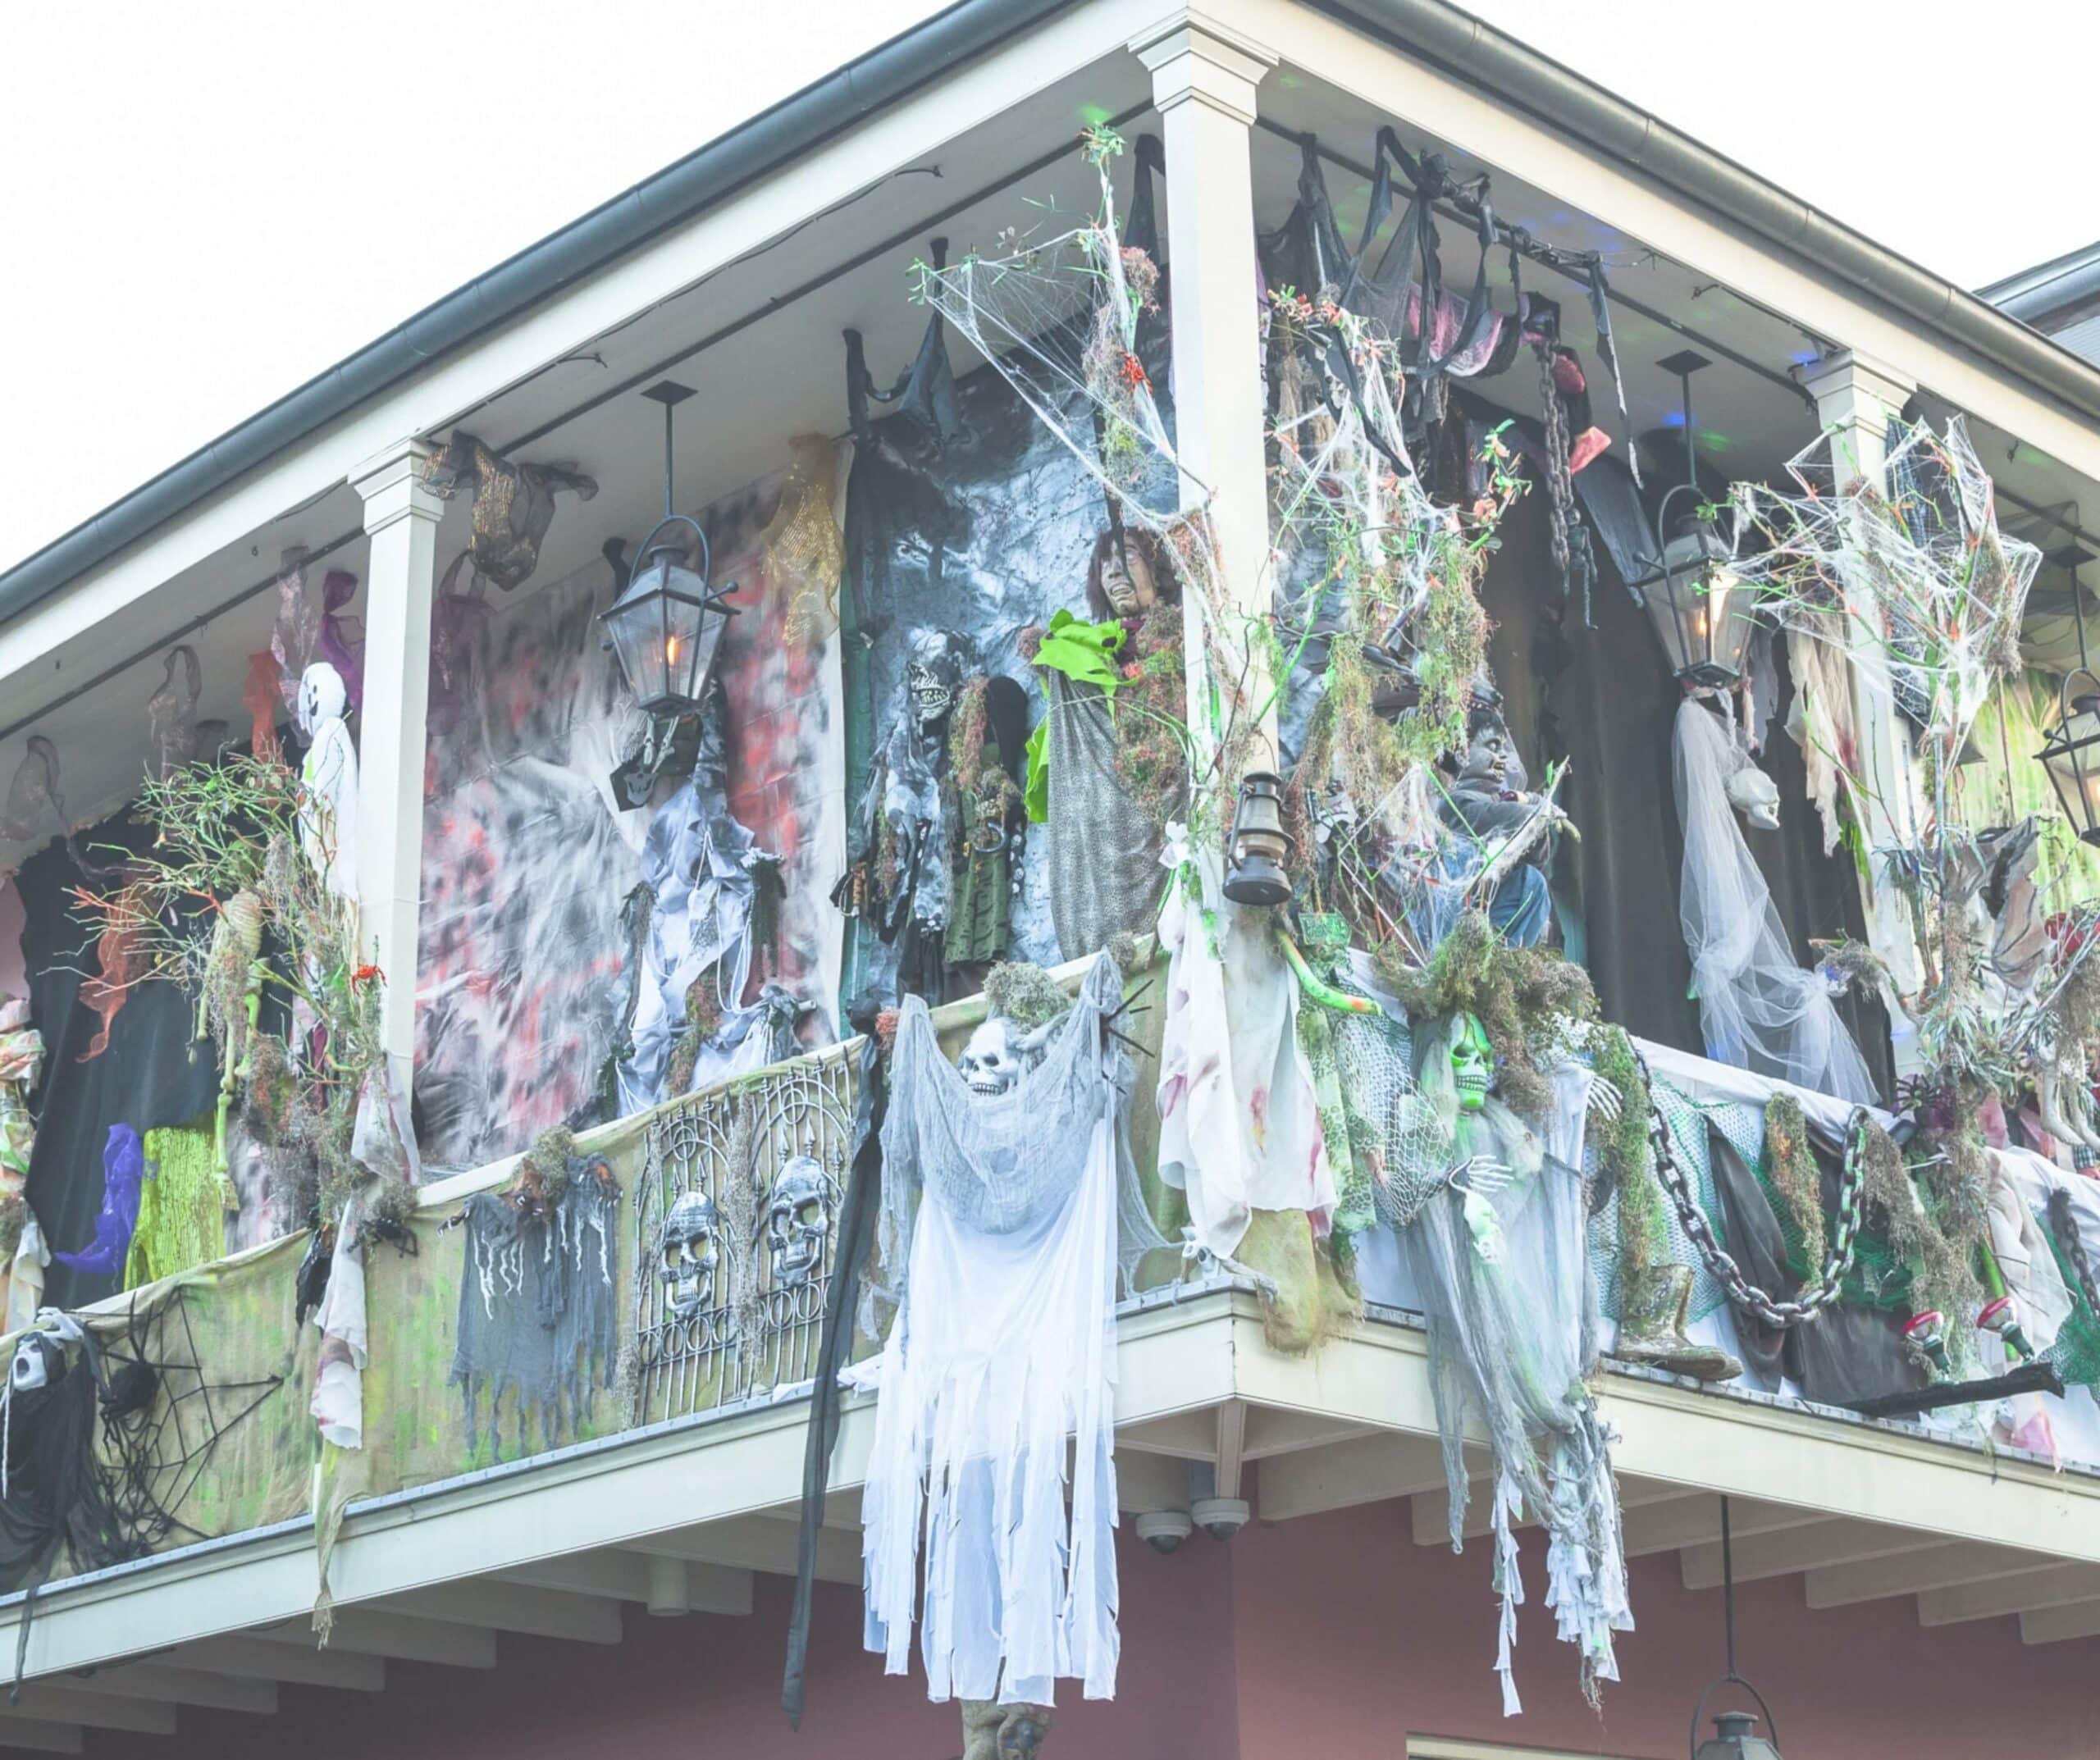 How to Spend Halloween in New Orleans, Dance Clubs Near Me